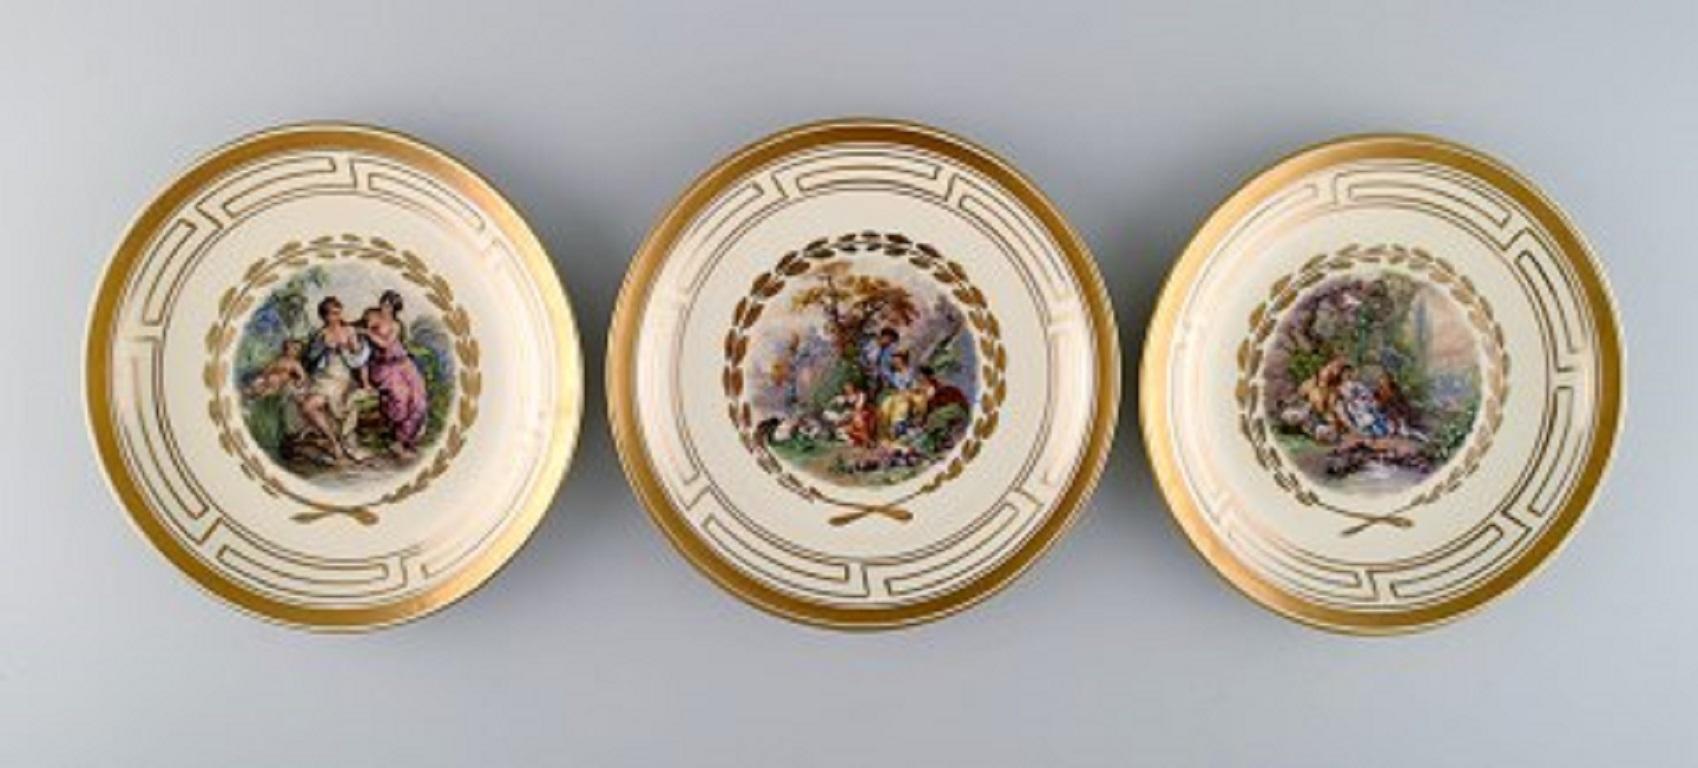 20th Century Royal Copenhagen Coffee Service for 10 People in Porcelain with Romantic Scenes